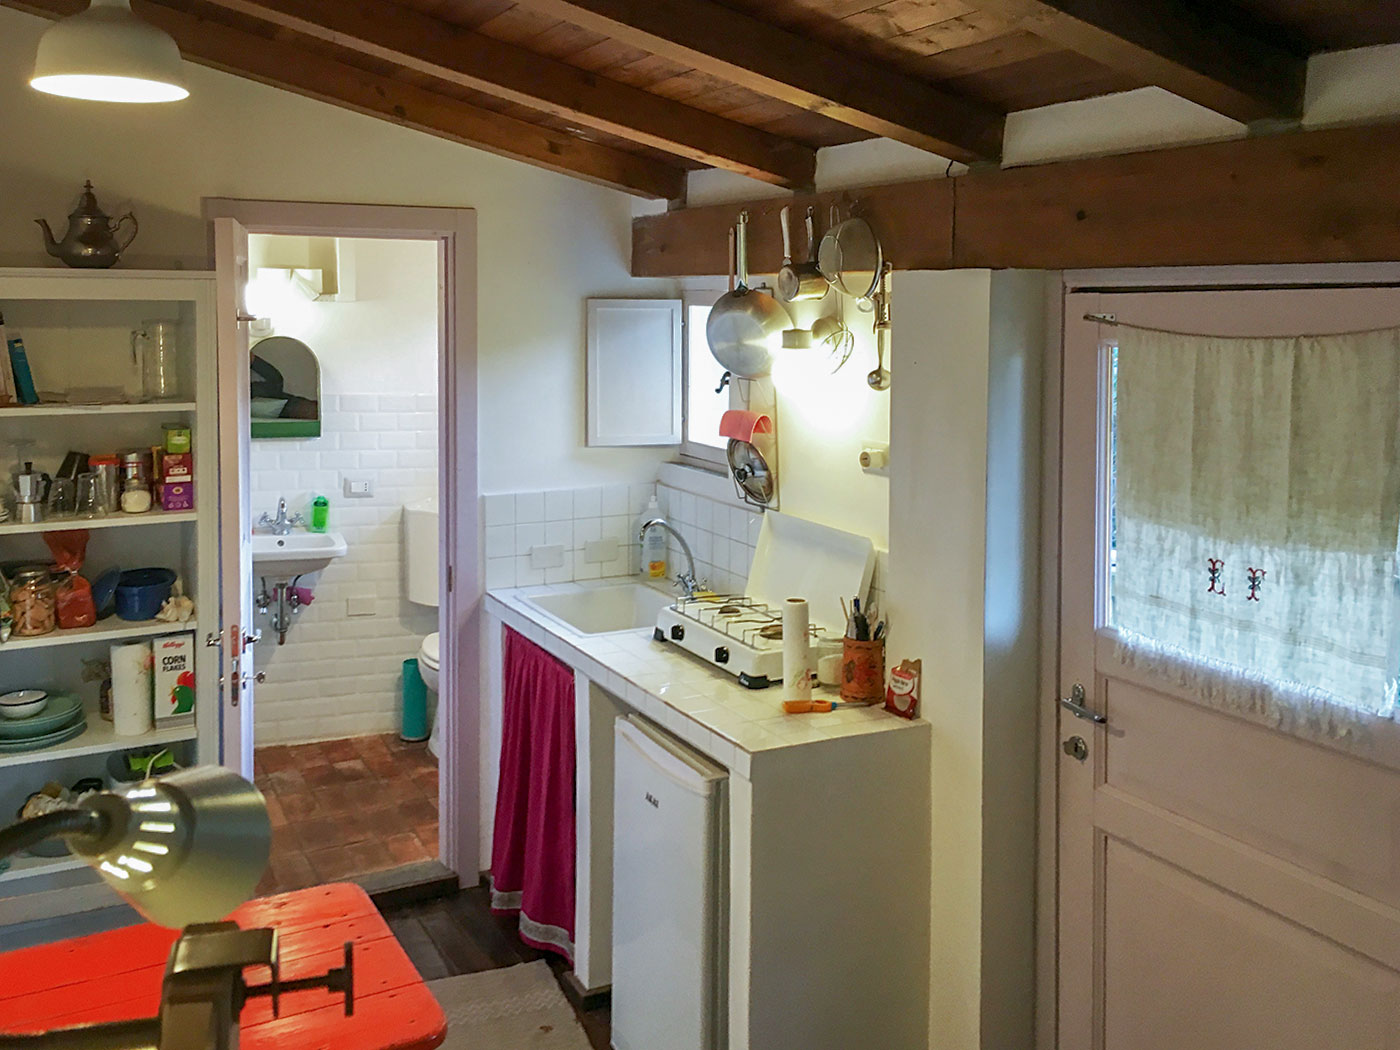 Kitchen and entrance view